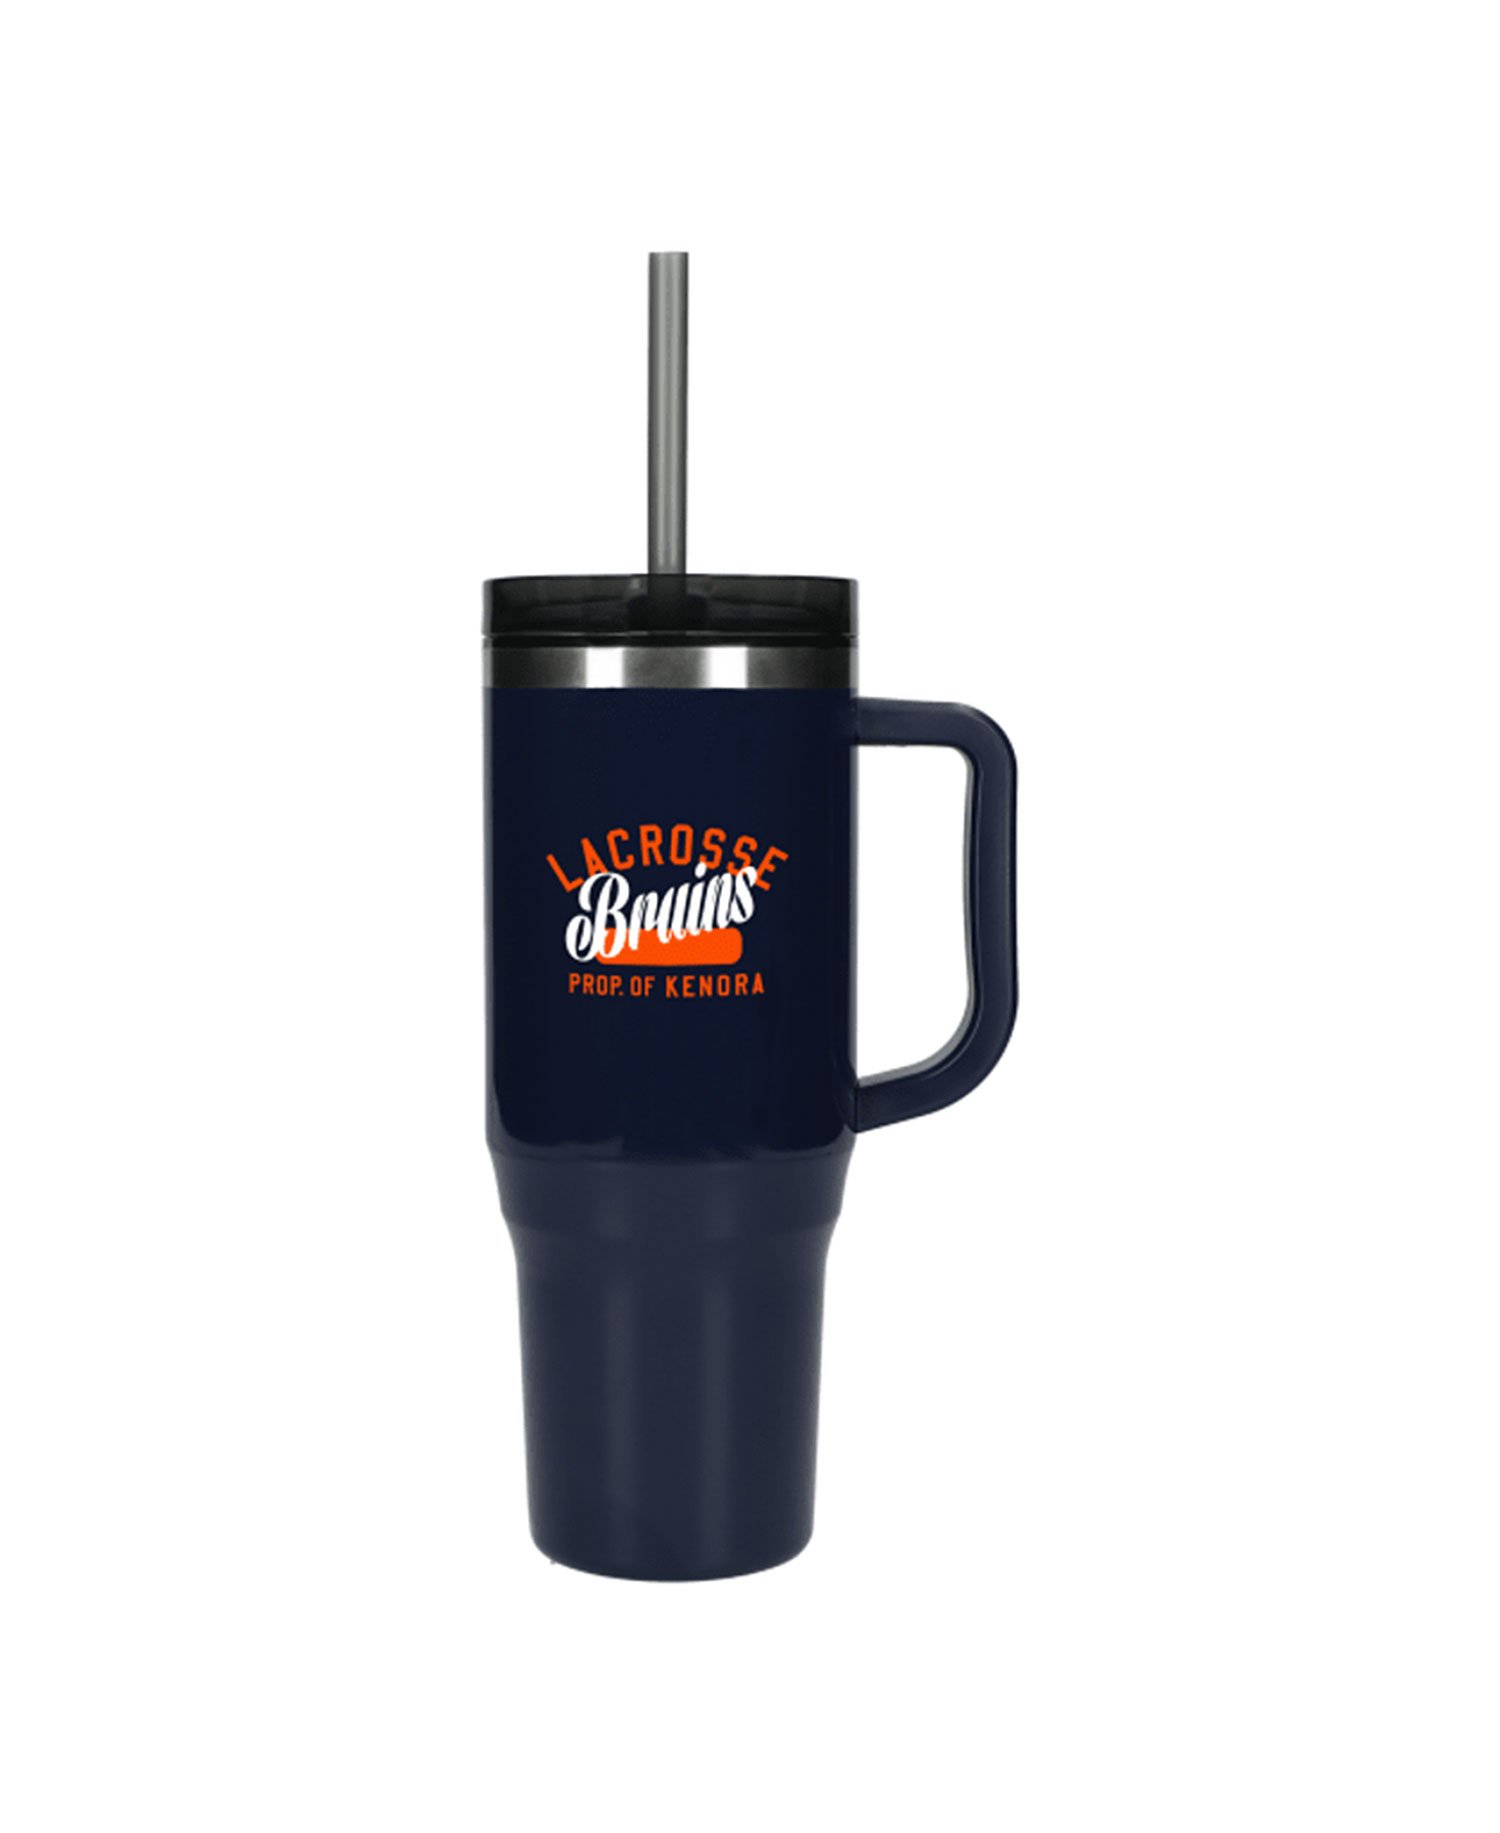 https://www.customearthpromos.com/media/catalog/product/s/t/stainless-steel-thor-tumbler-navy-ss76_1.jpg